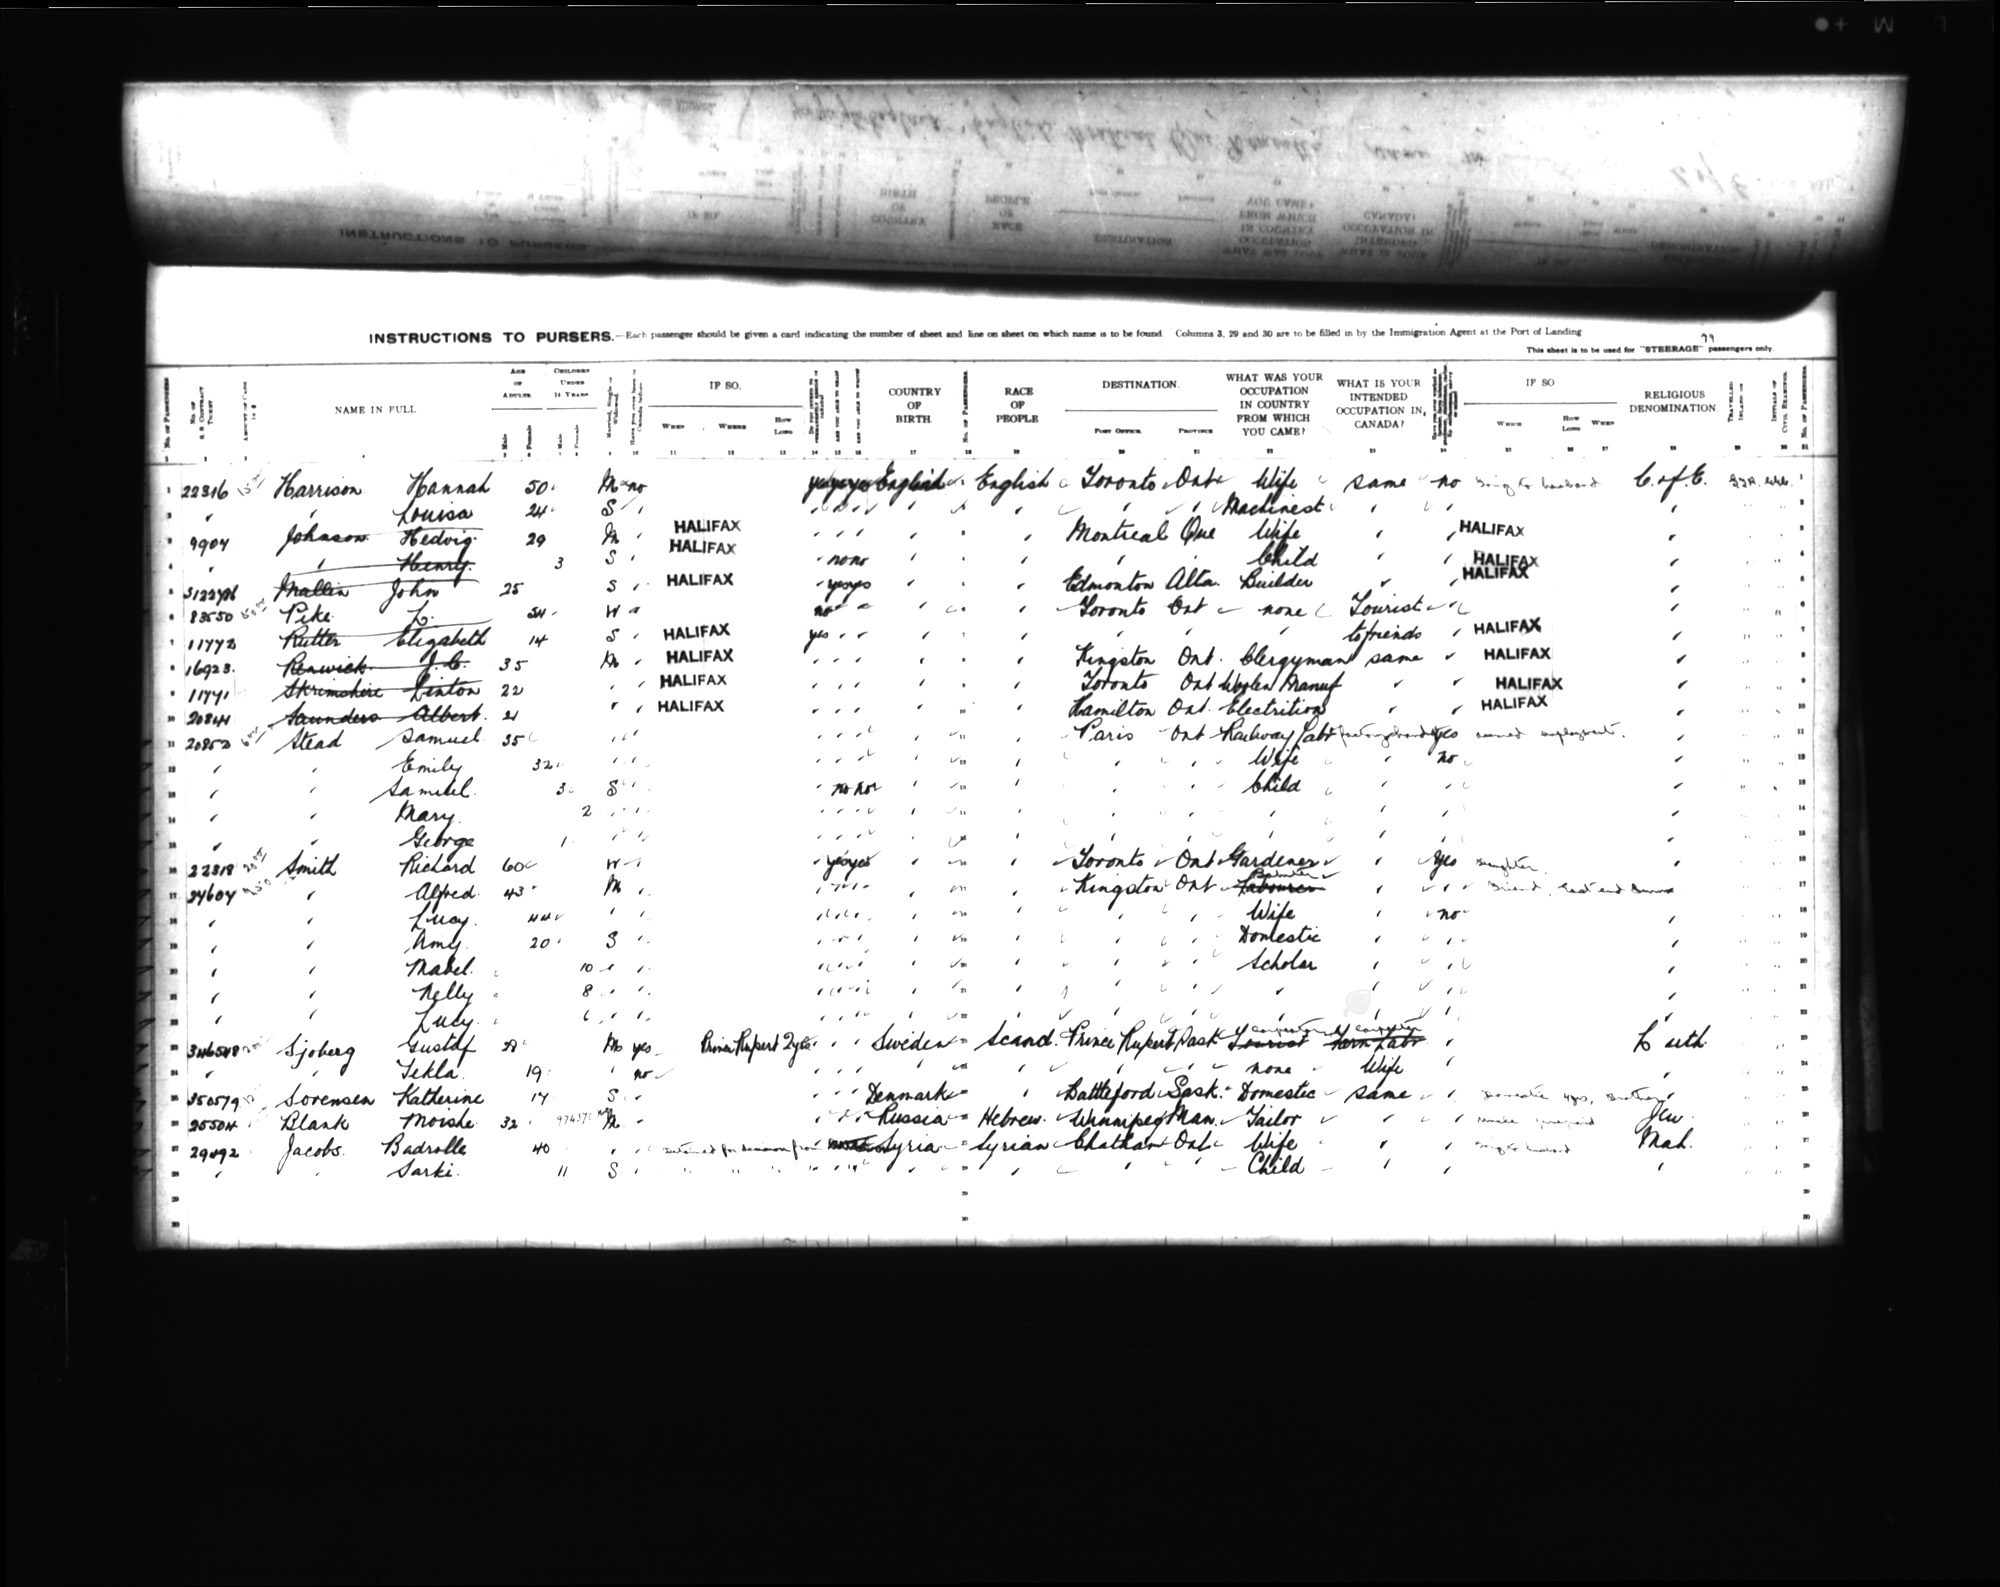 Digitized page of Passenger Lists for Image No.: CANIMM1913PLIST_0000406960-00592